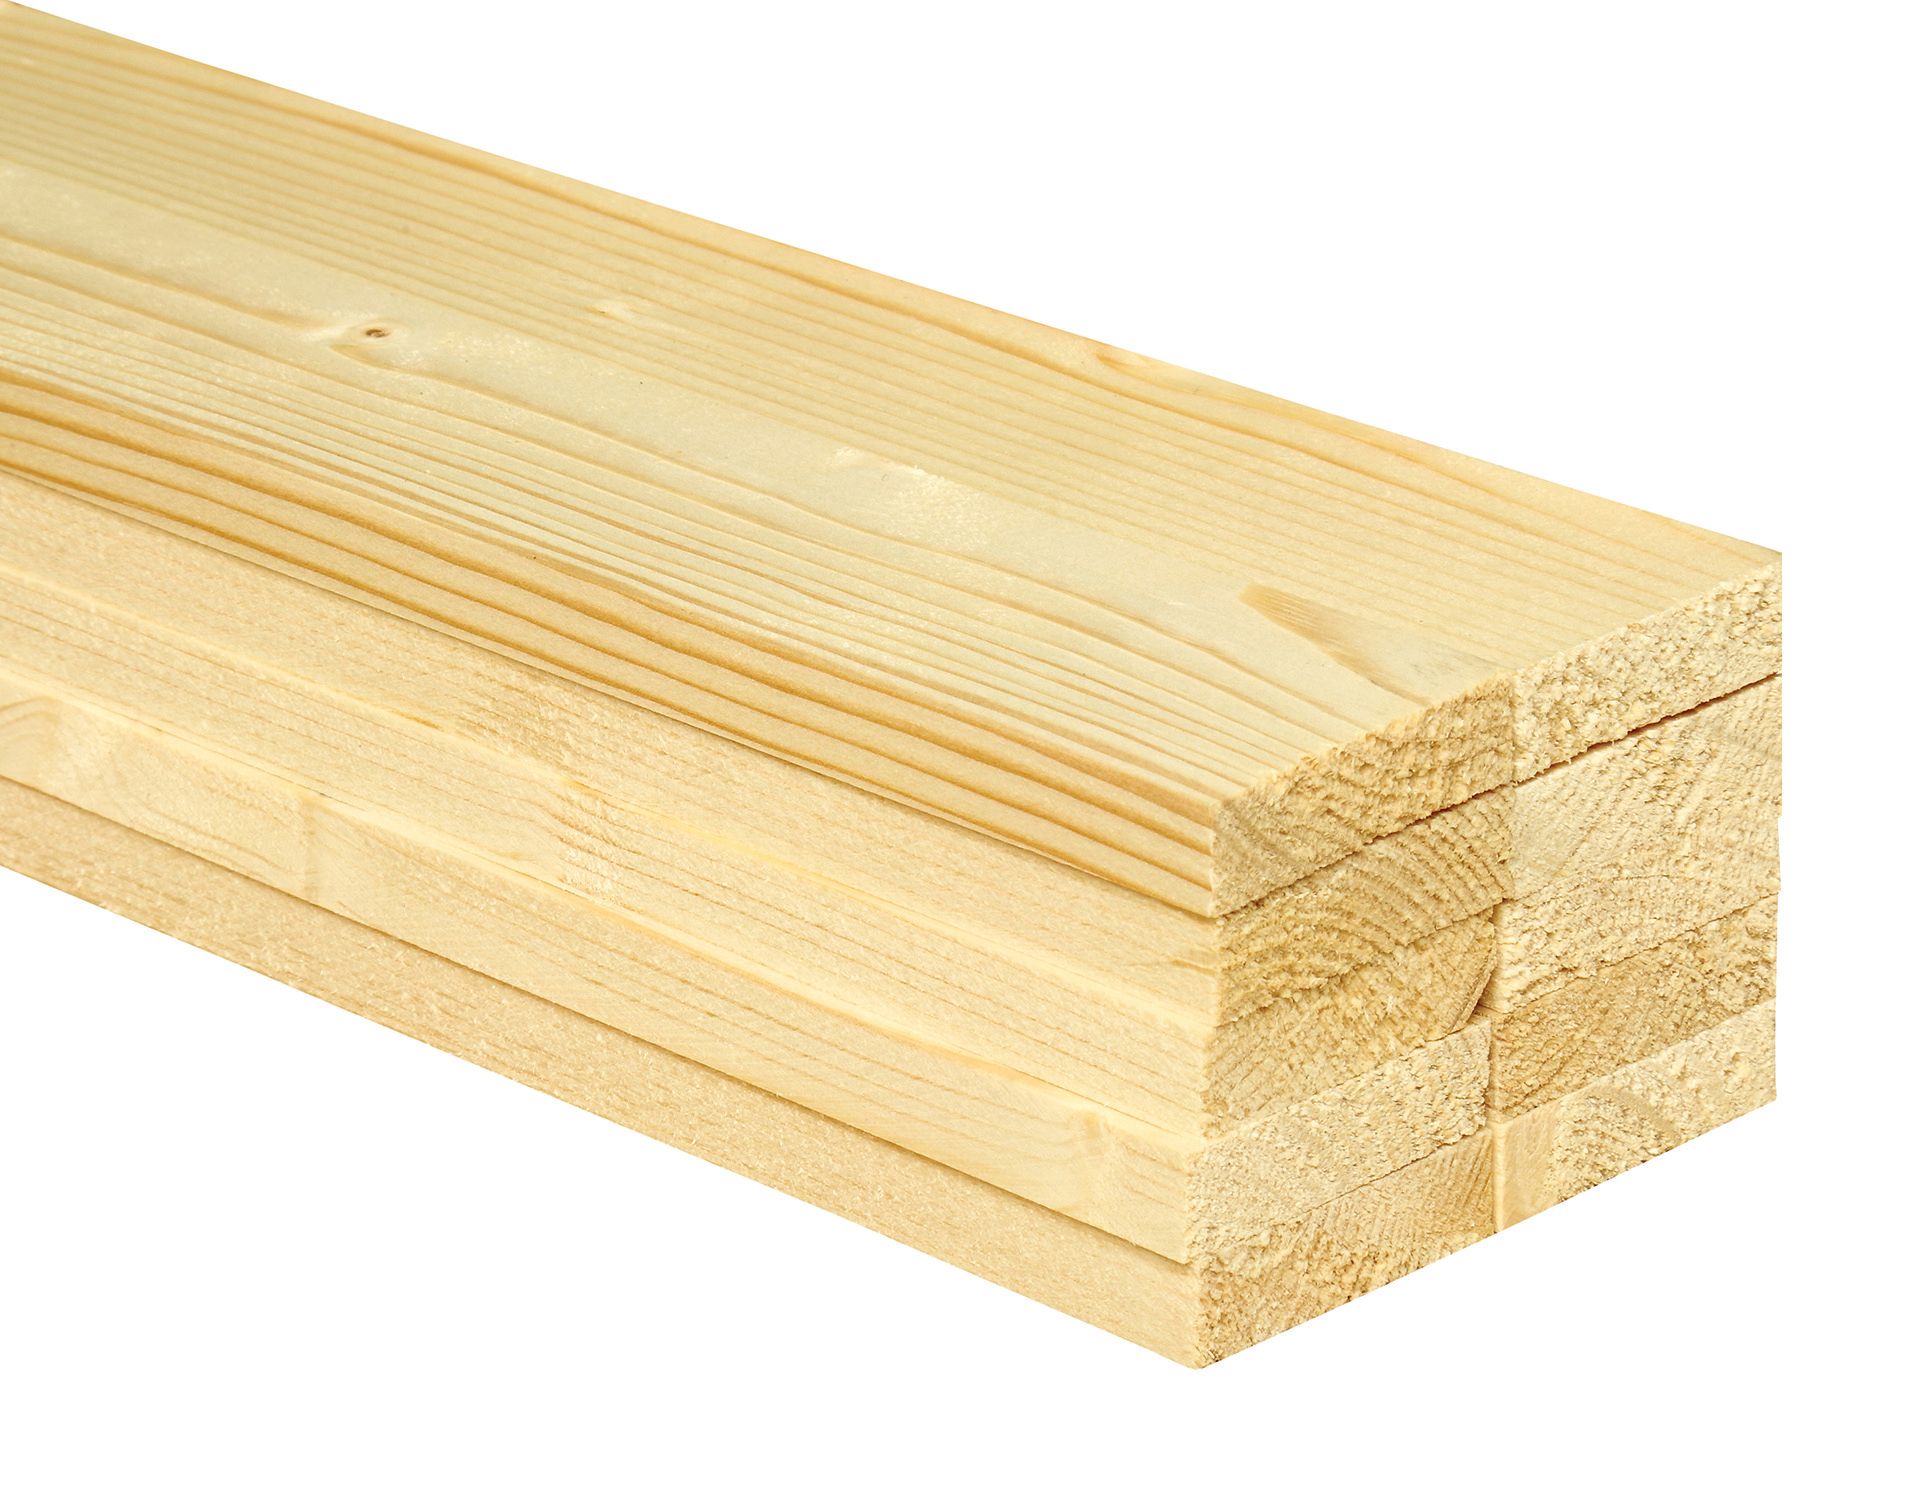 Image of Wickes Kiln Dried White Whitewood Untreated PSE Timber - 12x44x2400mm - Pack of 10